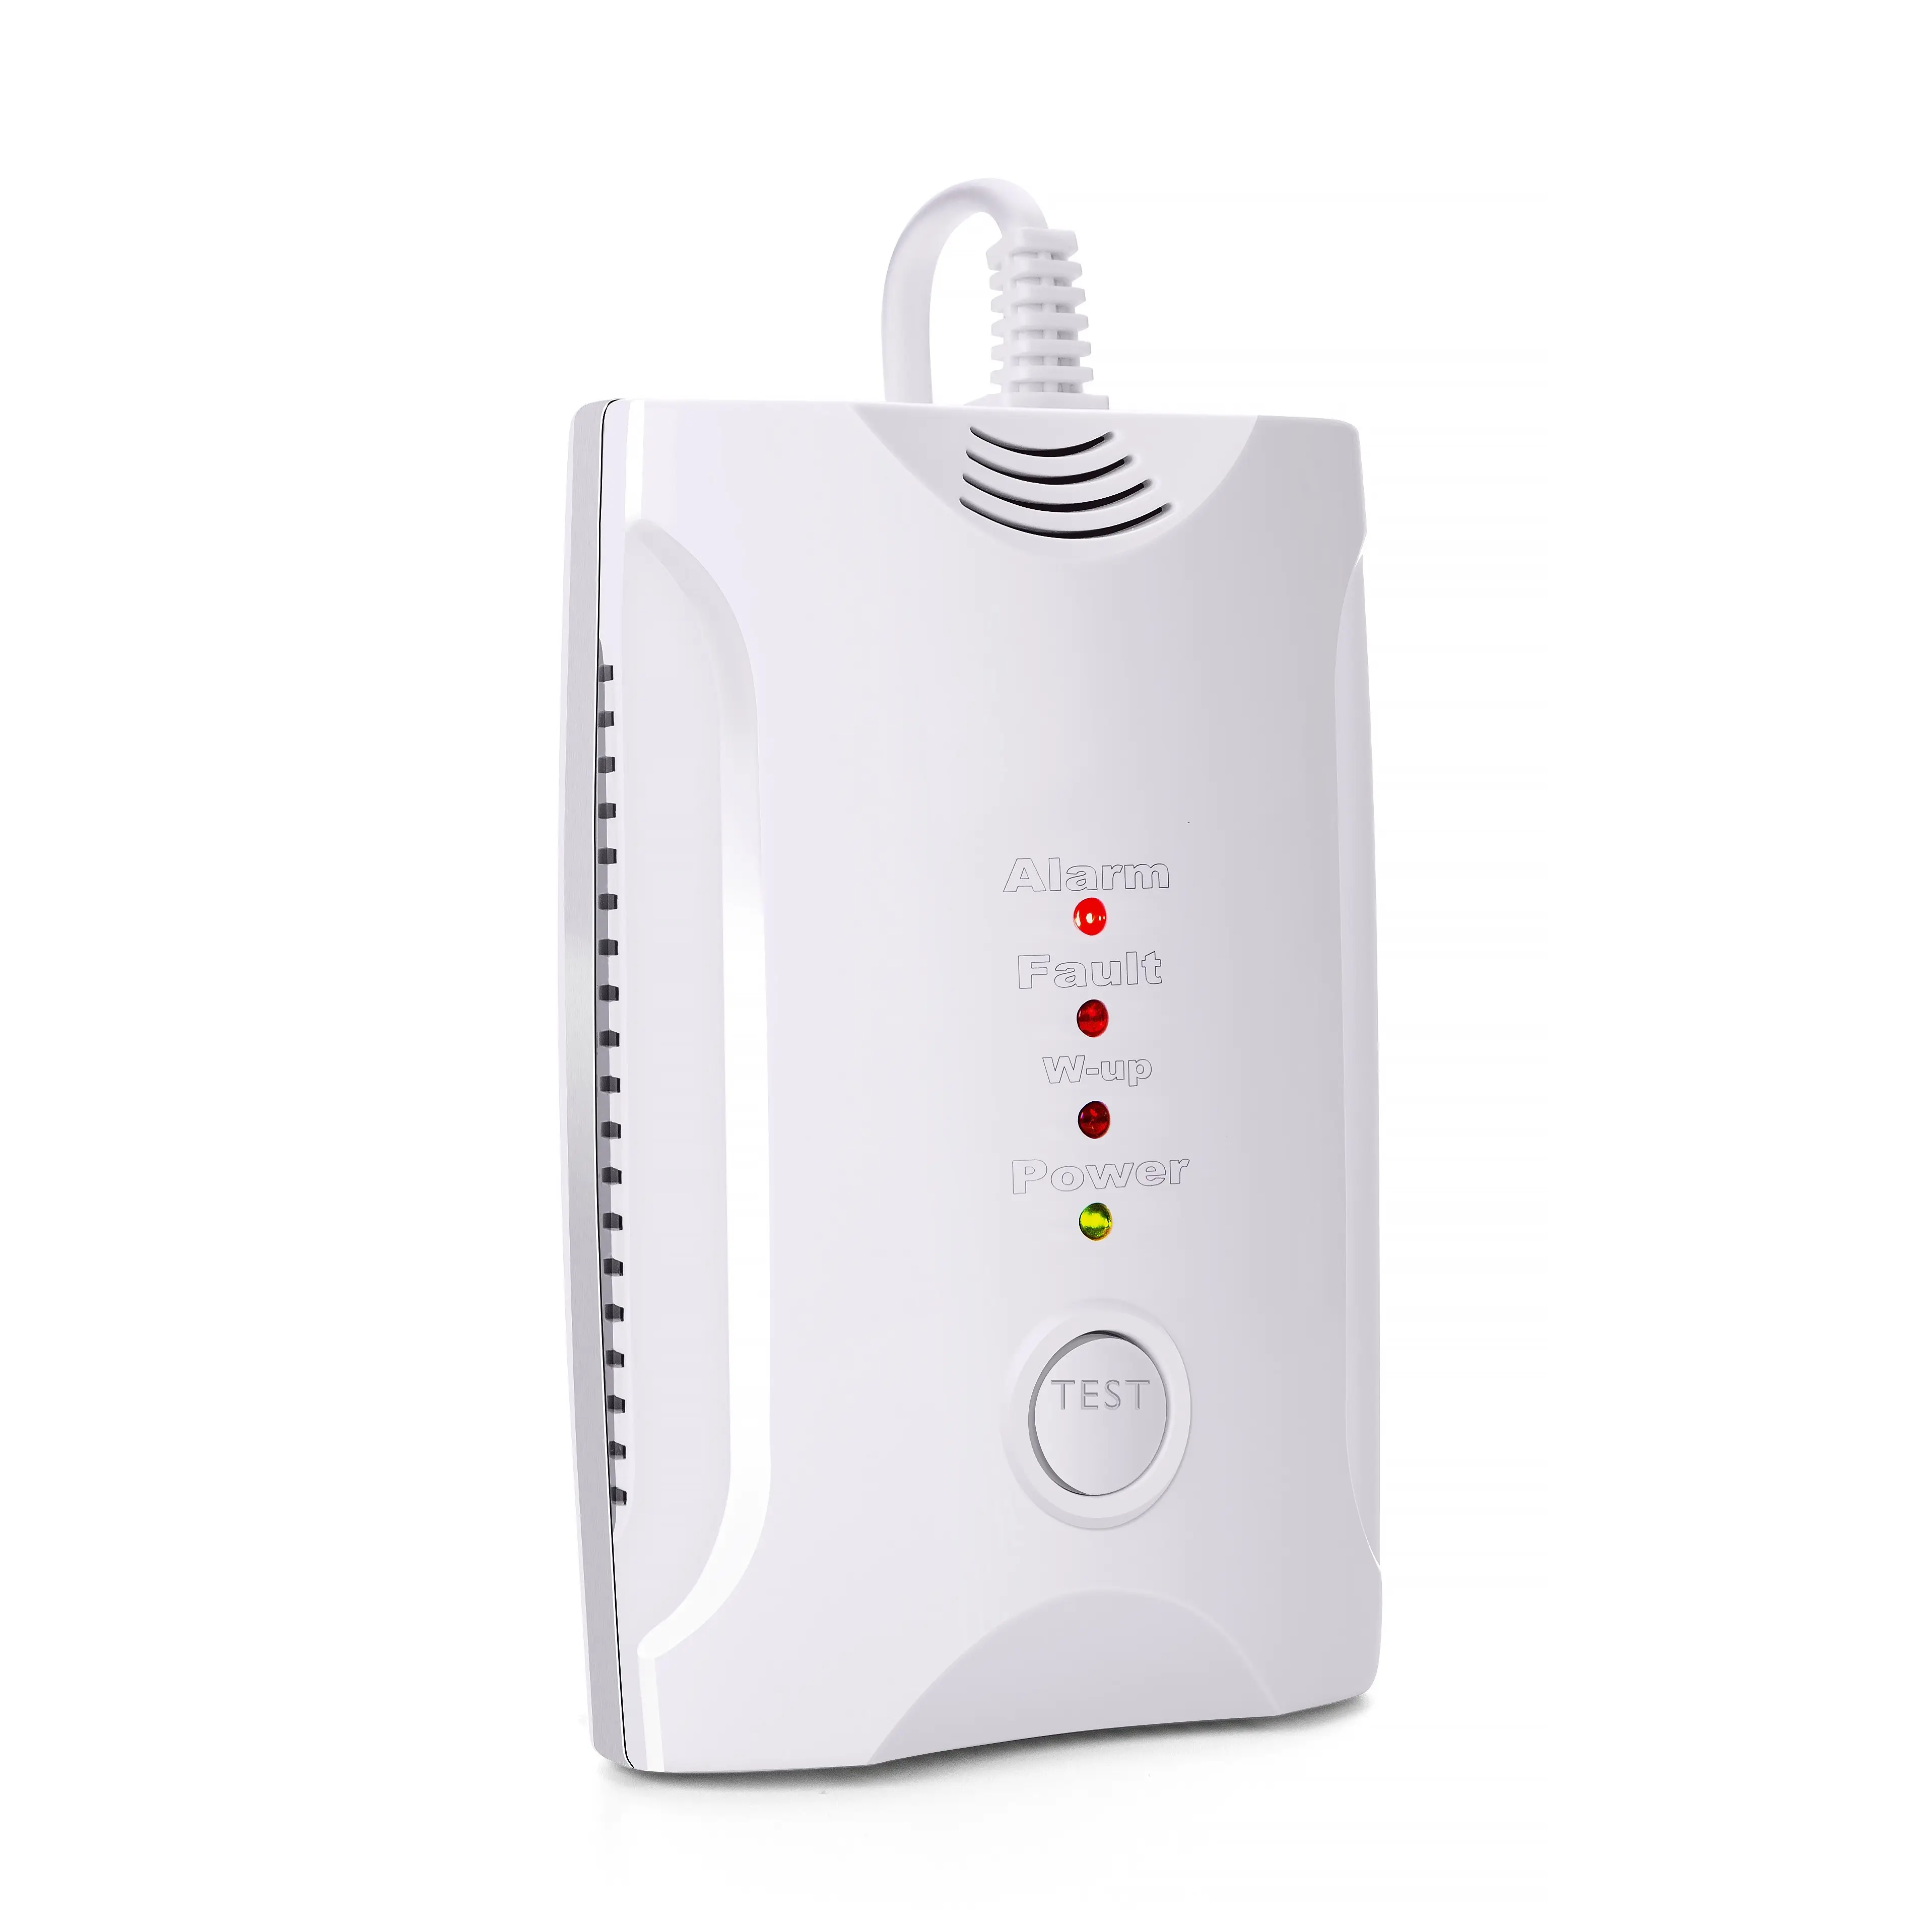 Chicheng security fire alarm for home use home gas leakage detector gas sensor detector CCE